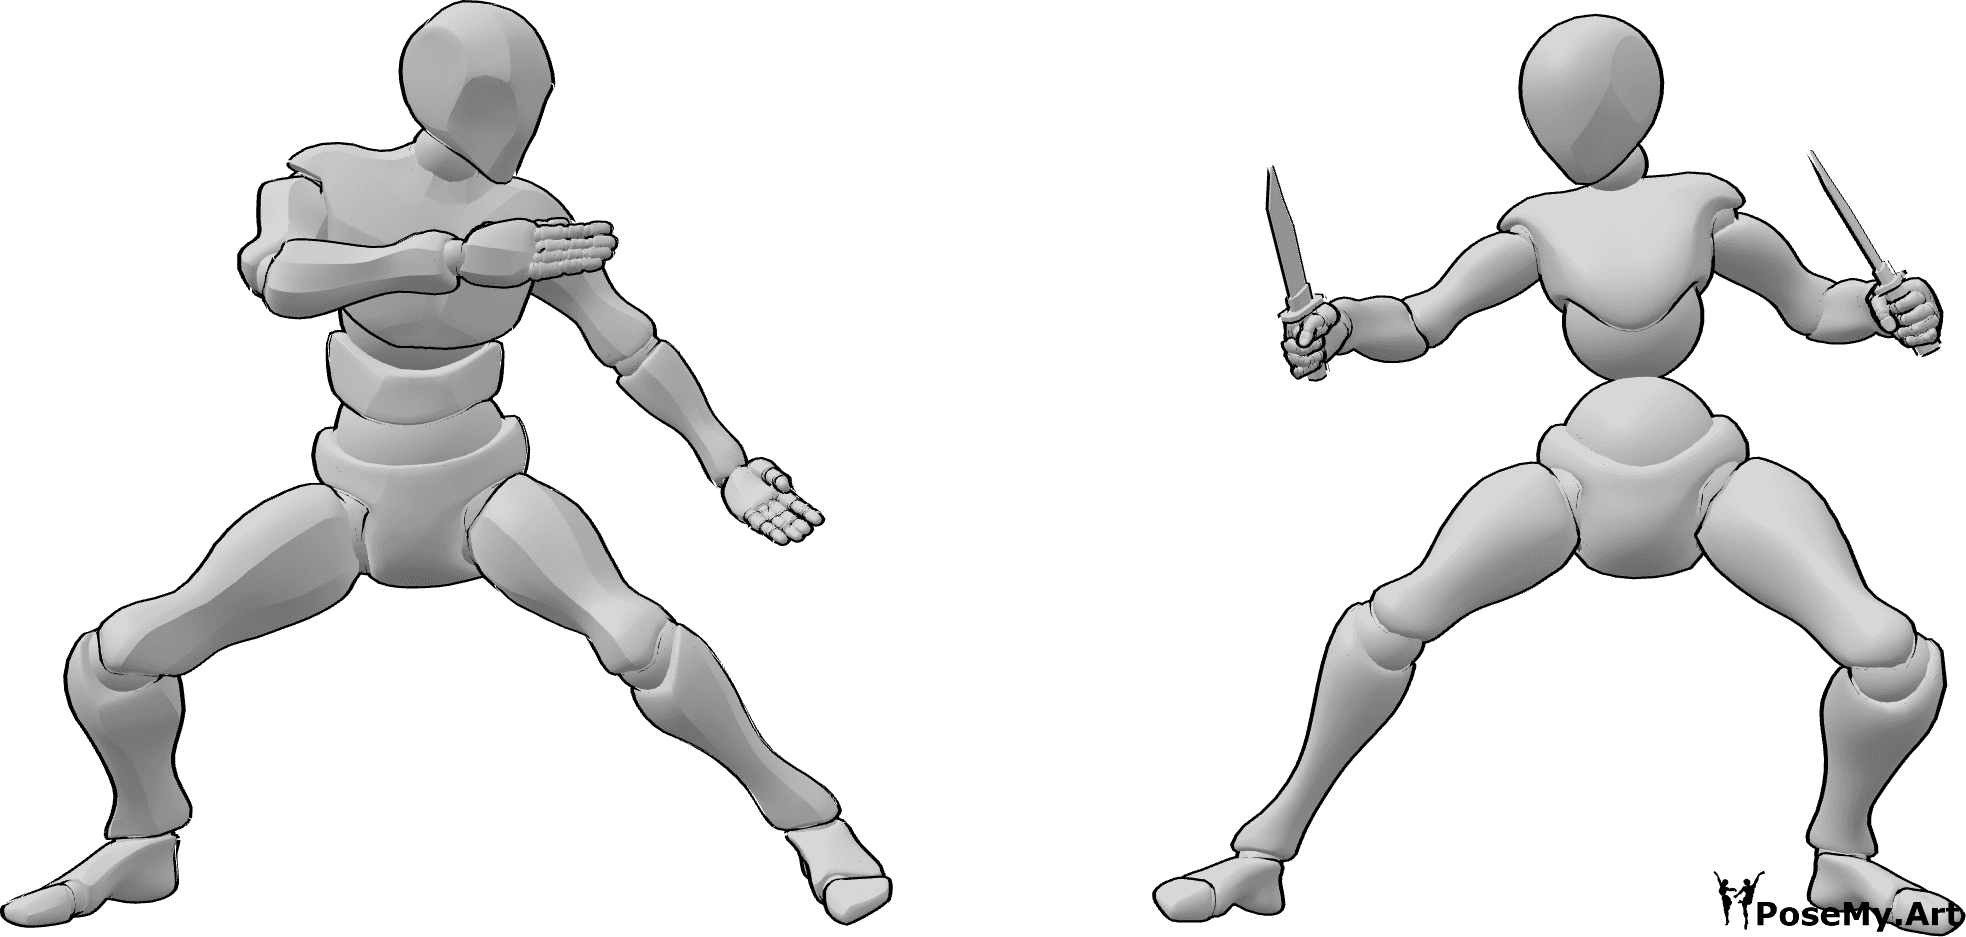 Pose Reference- Knives fighting pose - Female and male are about to start fighting, the female is holding knives